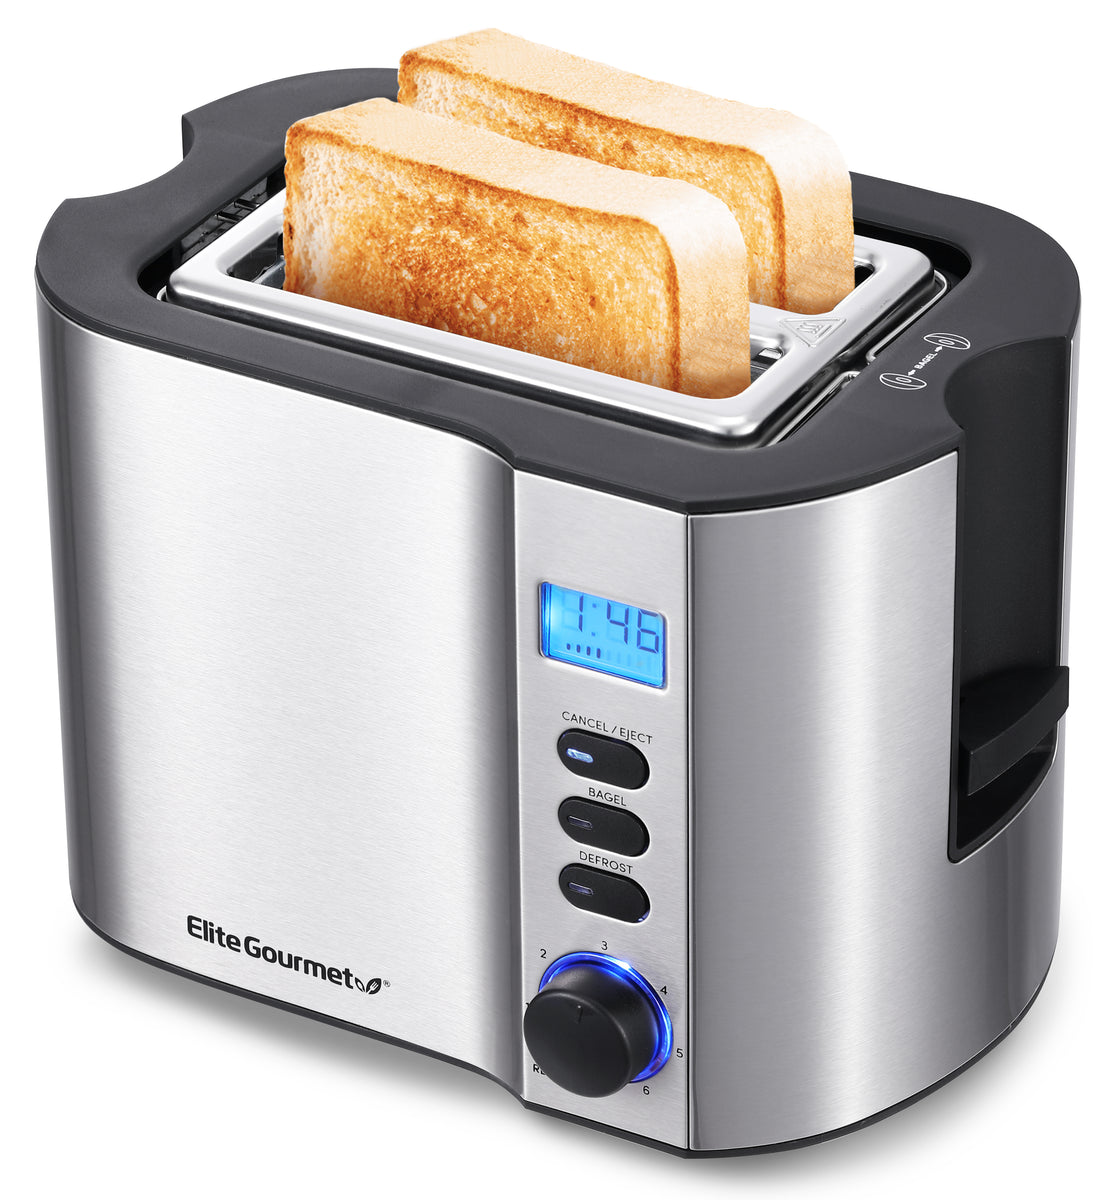  Mueller UltraToast Full Stainless Steel Toaster 4 Slice, Long  Extra-Wide Slots with Removable Tray, Cancel/Defrost/Reheat Functions, 6  Browning Levels with LED Display: Home & Kitchen